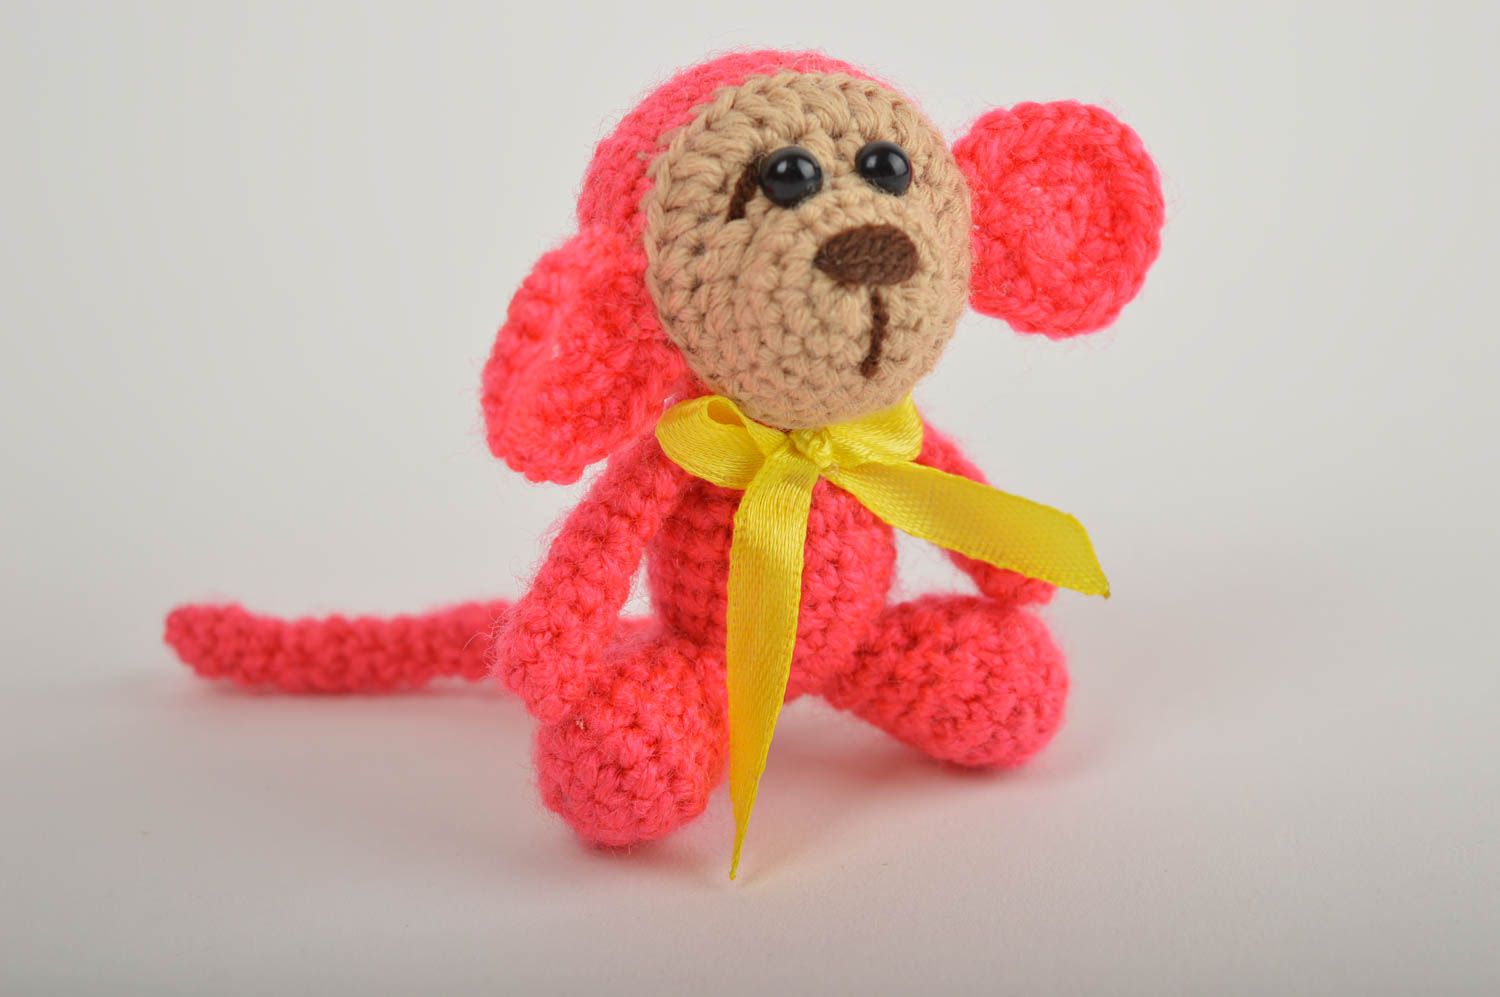 Crocheted handmade toys decorative soft toys for children stuffed toys for baby photo 2